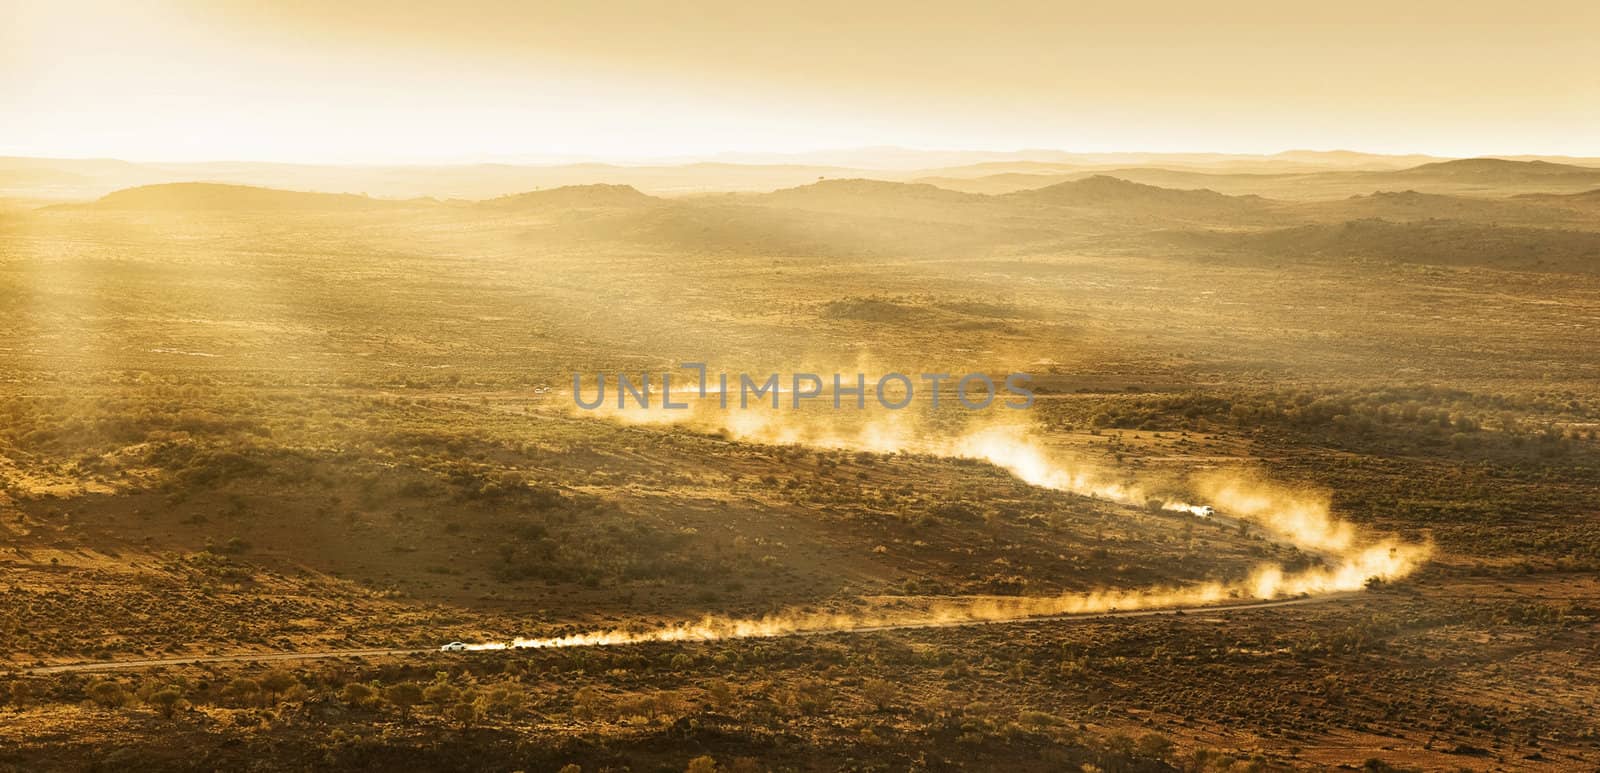 two cars leave plumes of dust as they go through the desert at sunset